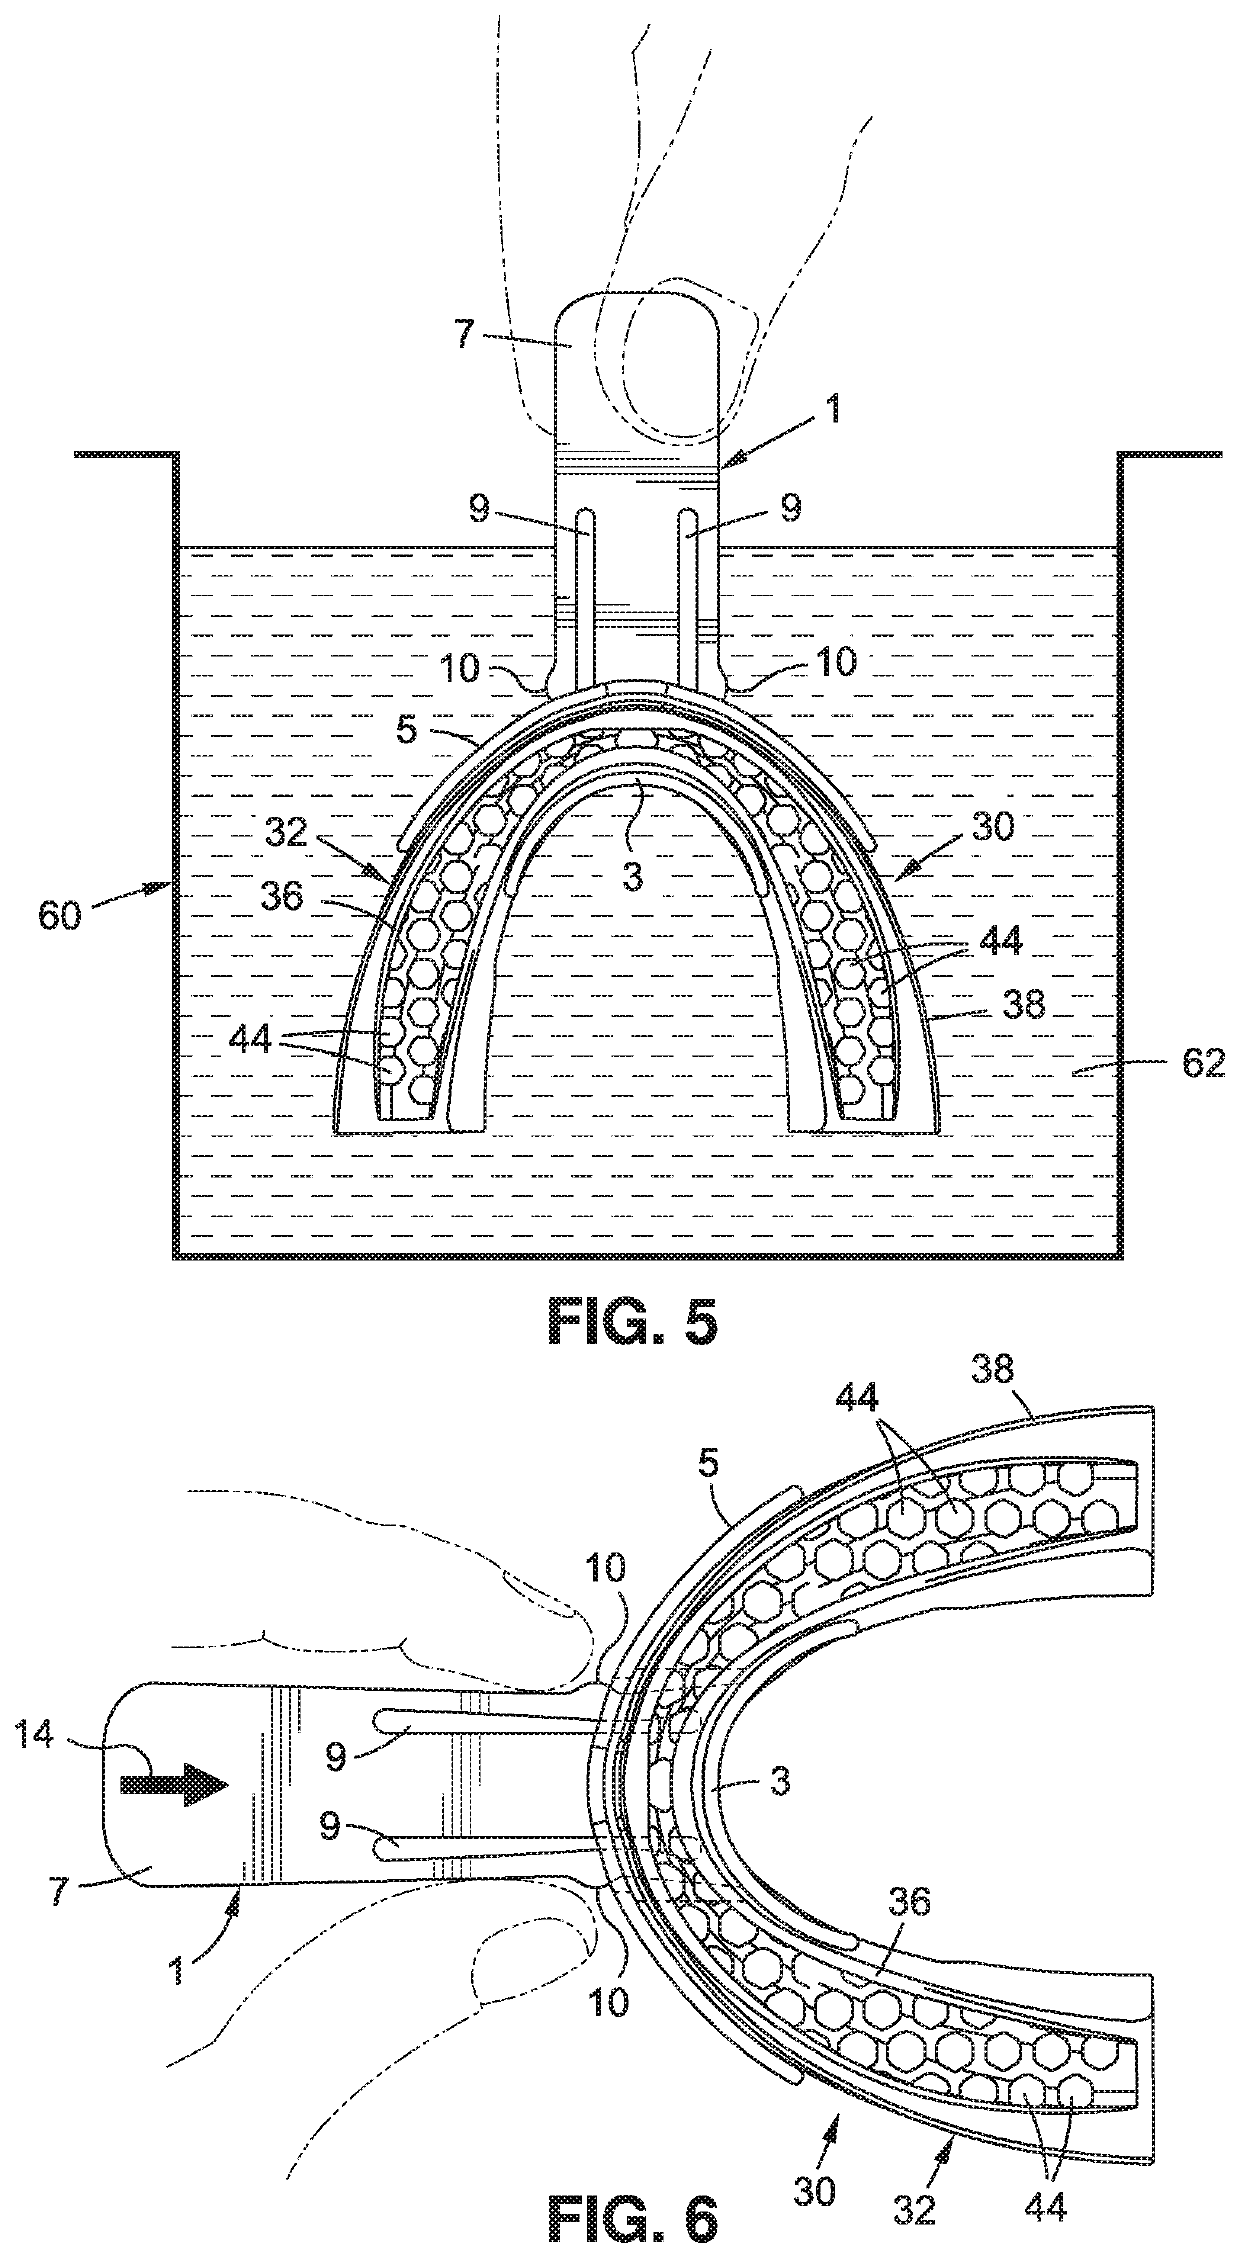 Impression tray with integral handle for an oral jaw advancement appliance